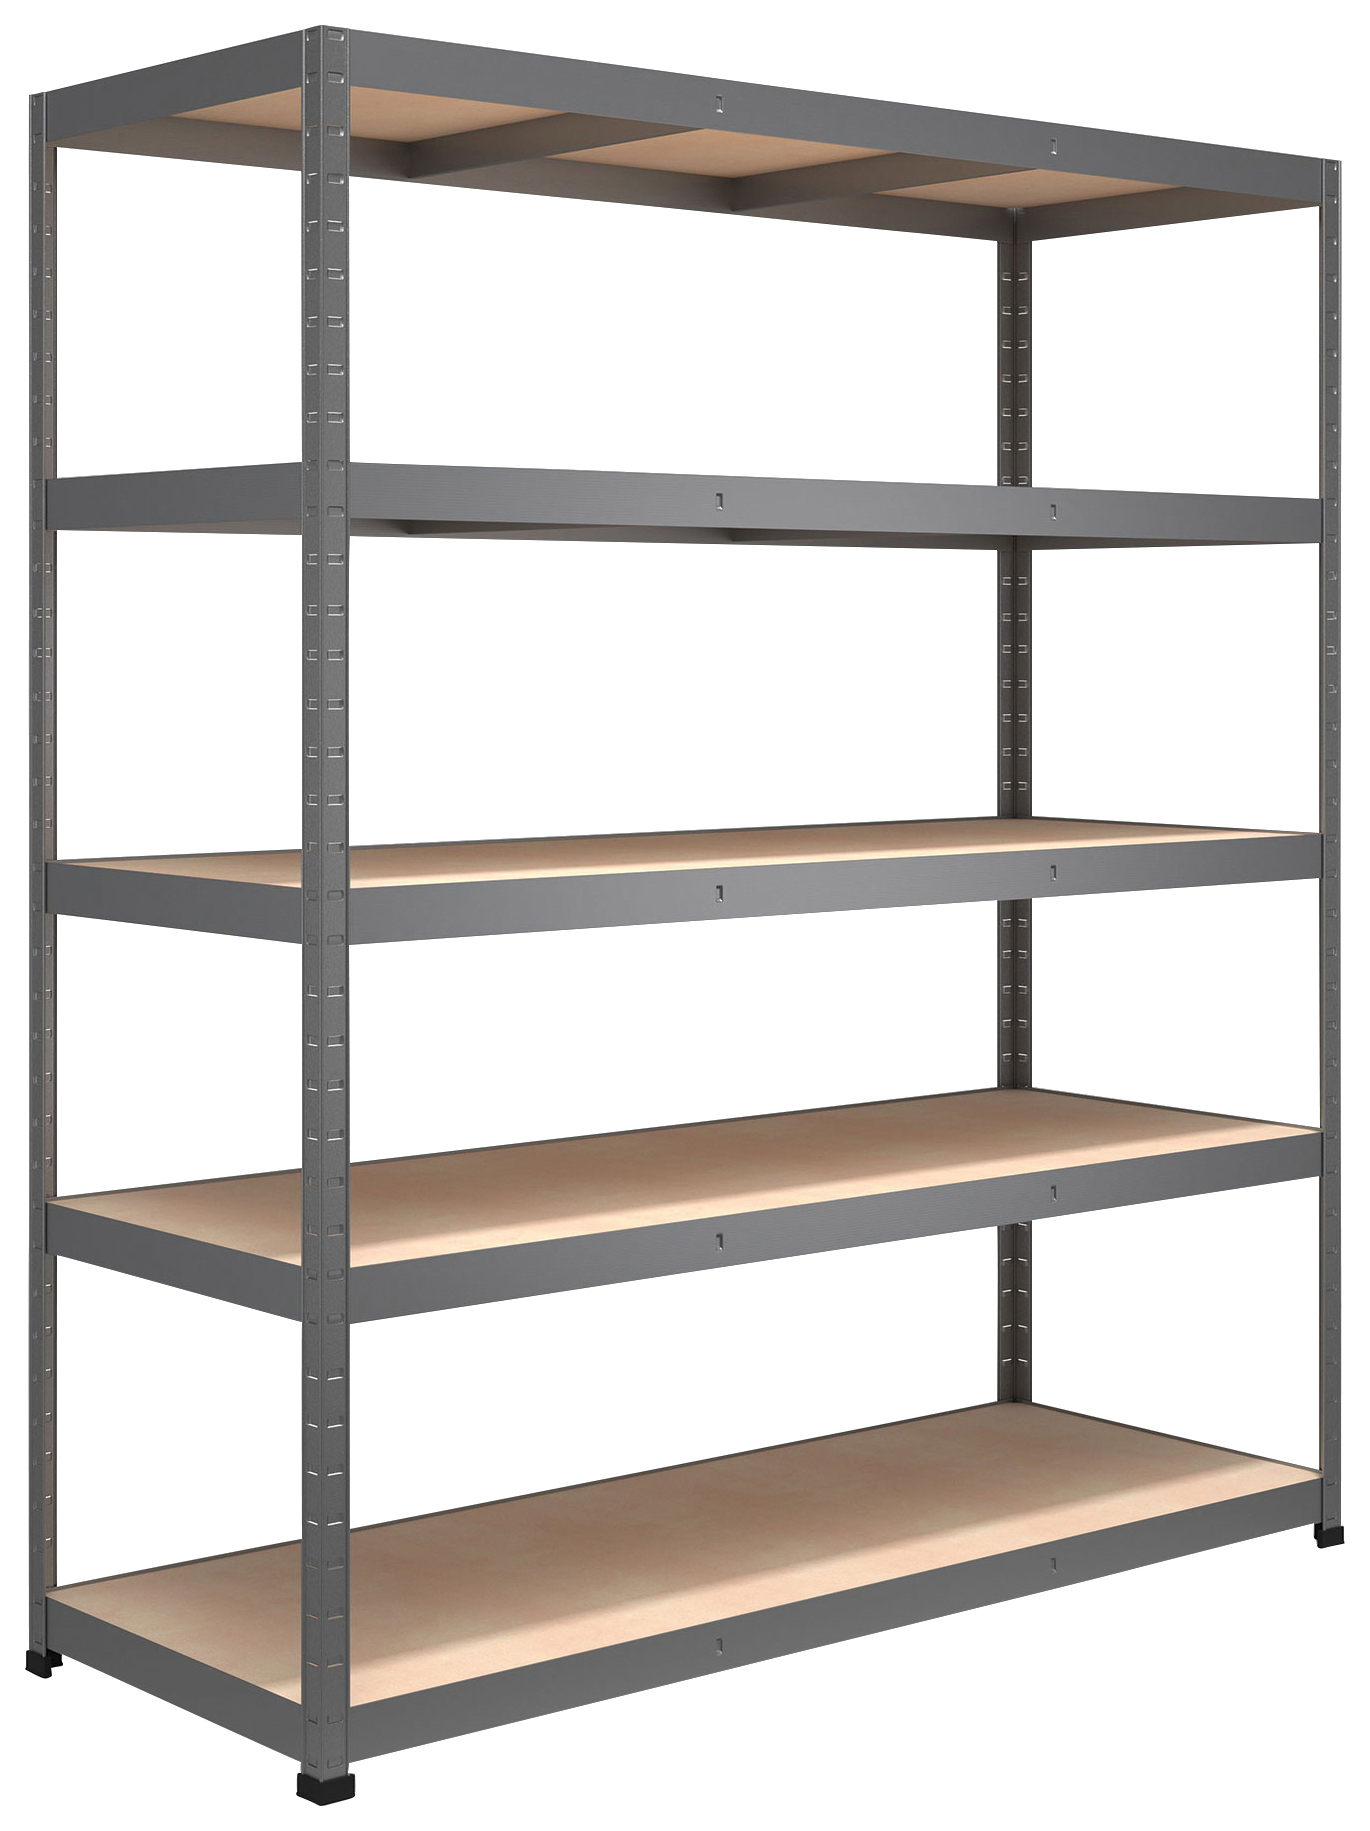 Image of Rb Boss 5 Tier Wood Shelving Kit Galvanised - 1800 x 1600 x 600mm 250kg Udl